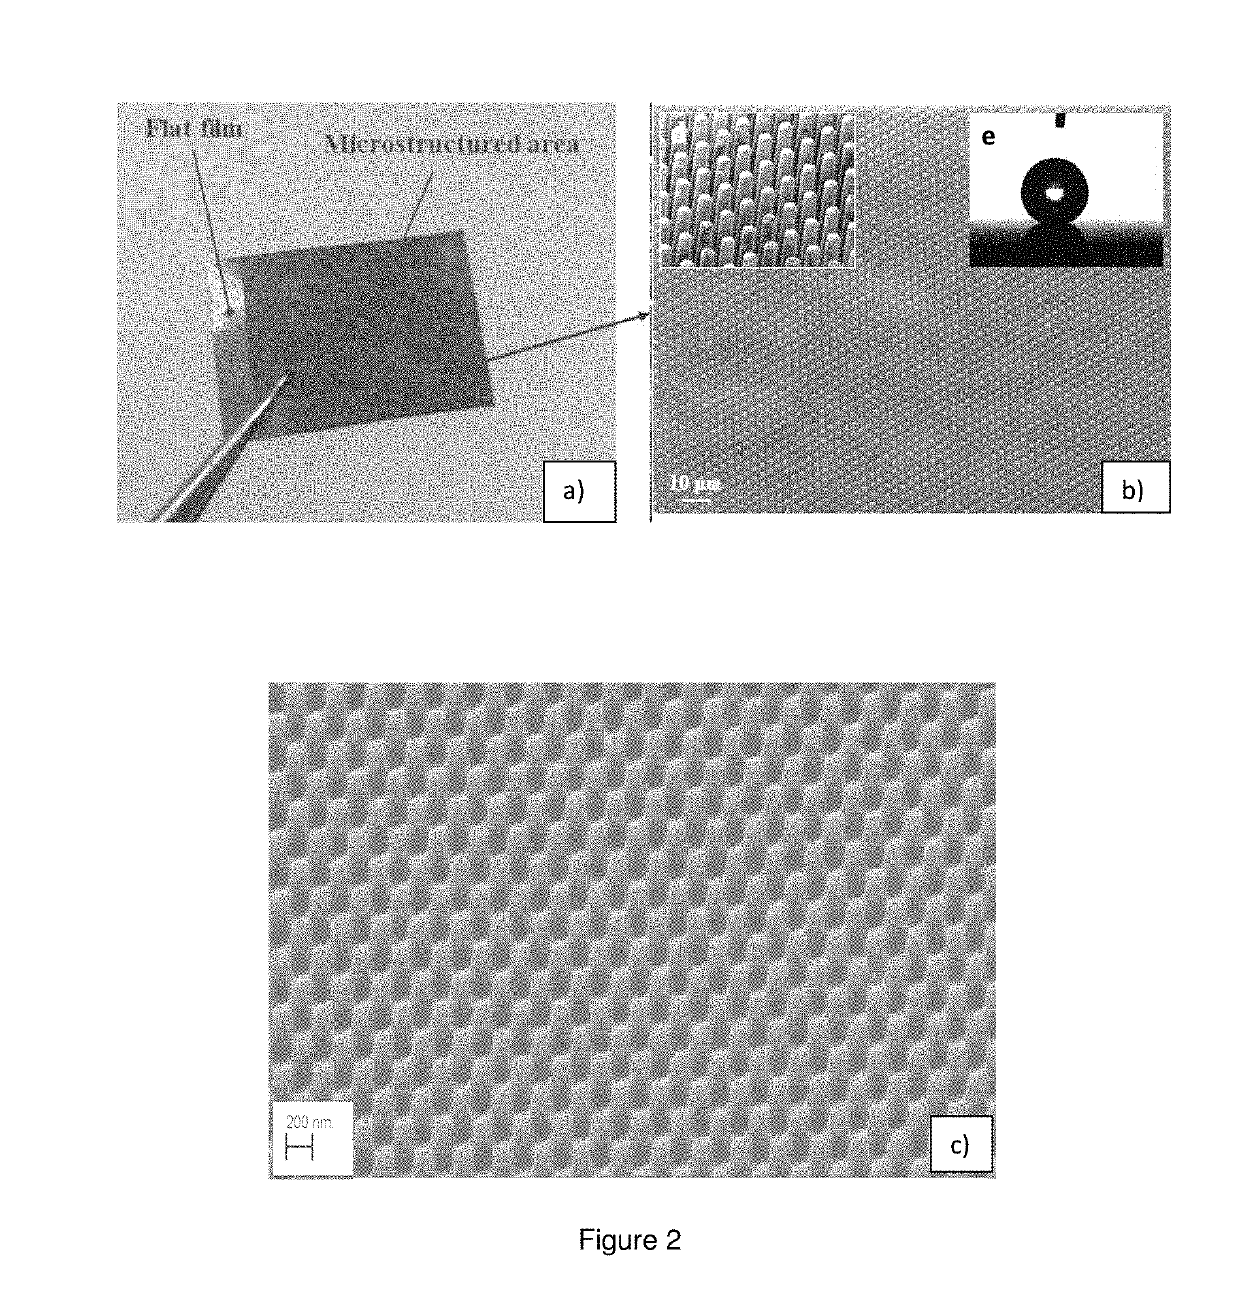 Polymeric composites with functional surfaces